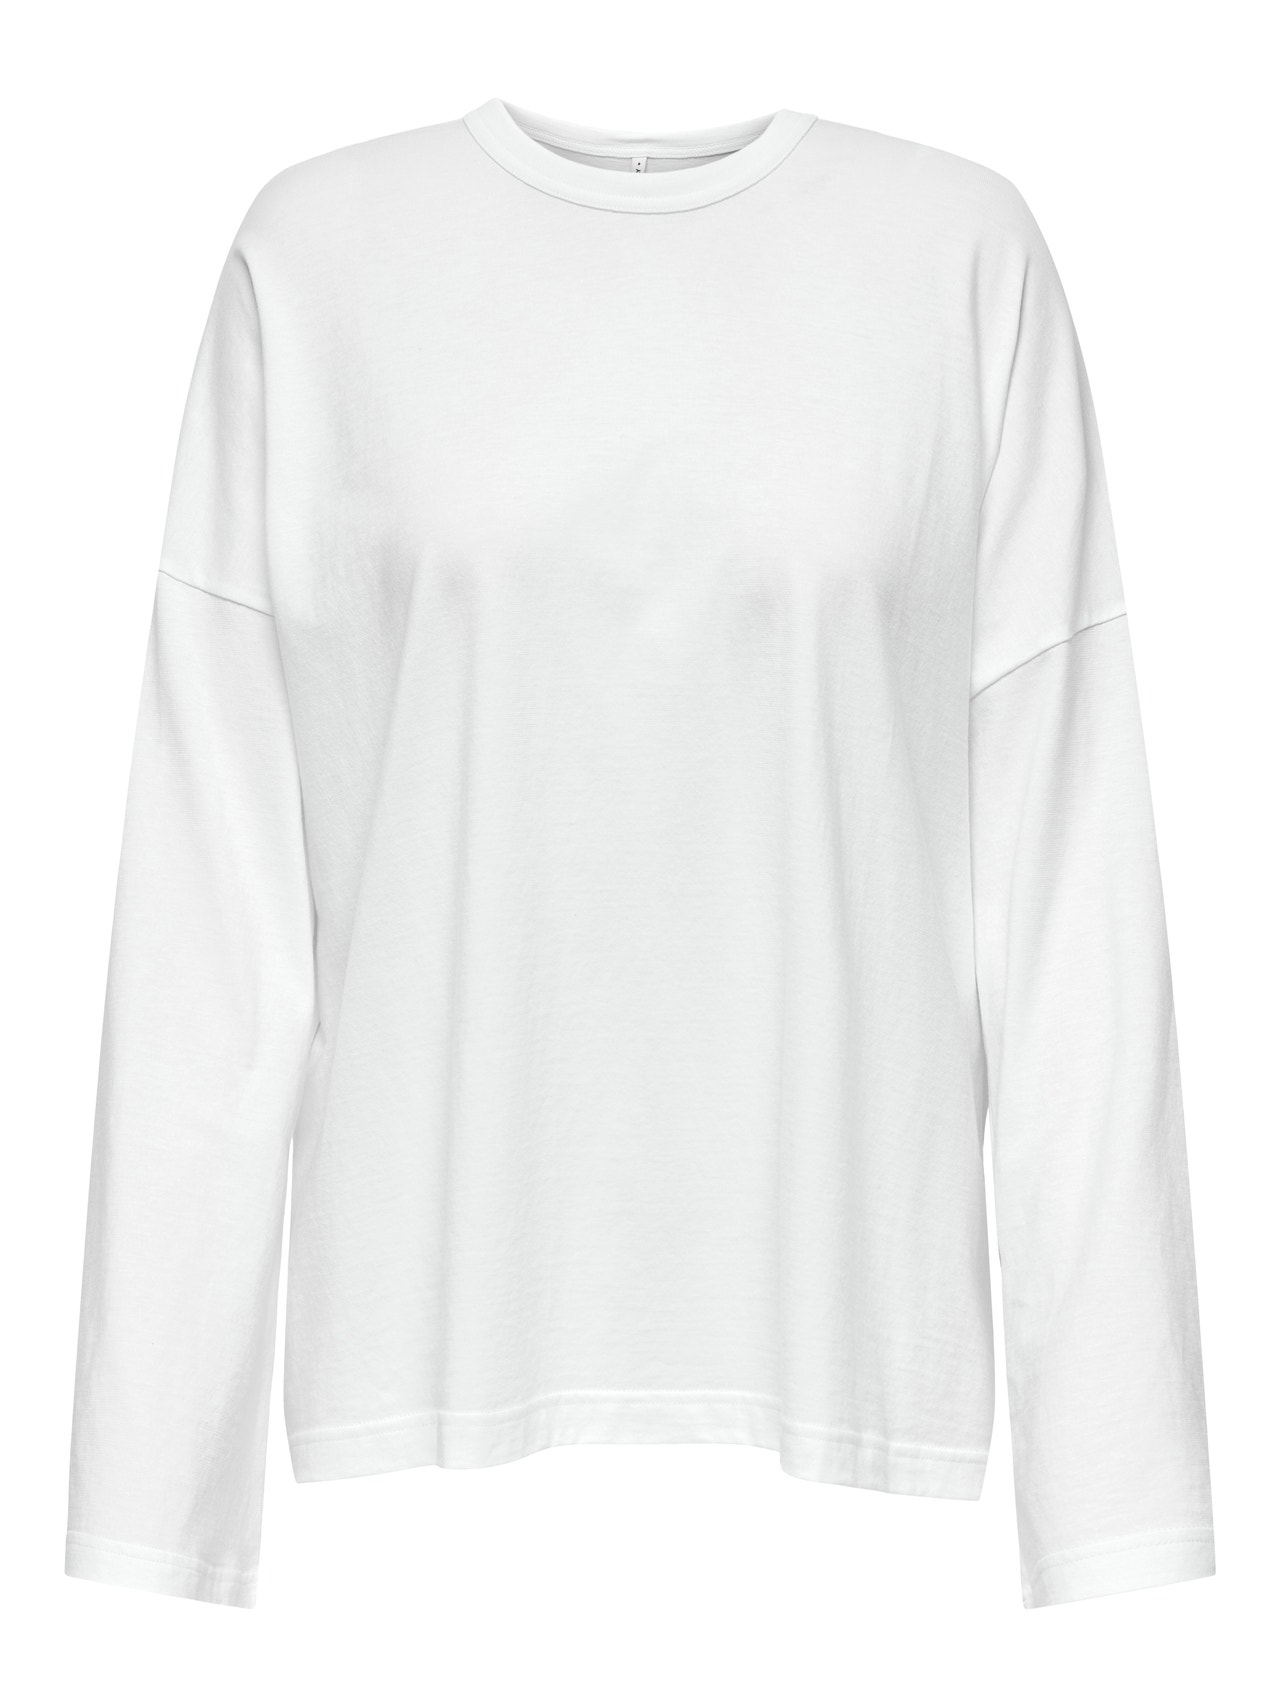 ONLY Regular Fit Round Neck Dropped shoulders Top -White - 15321733